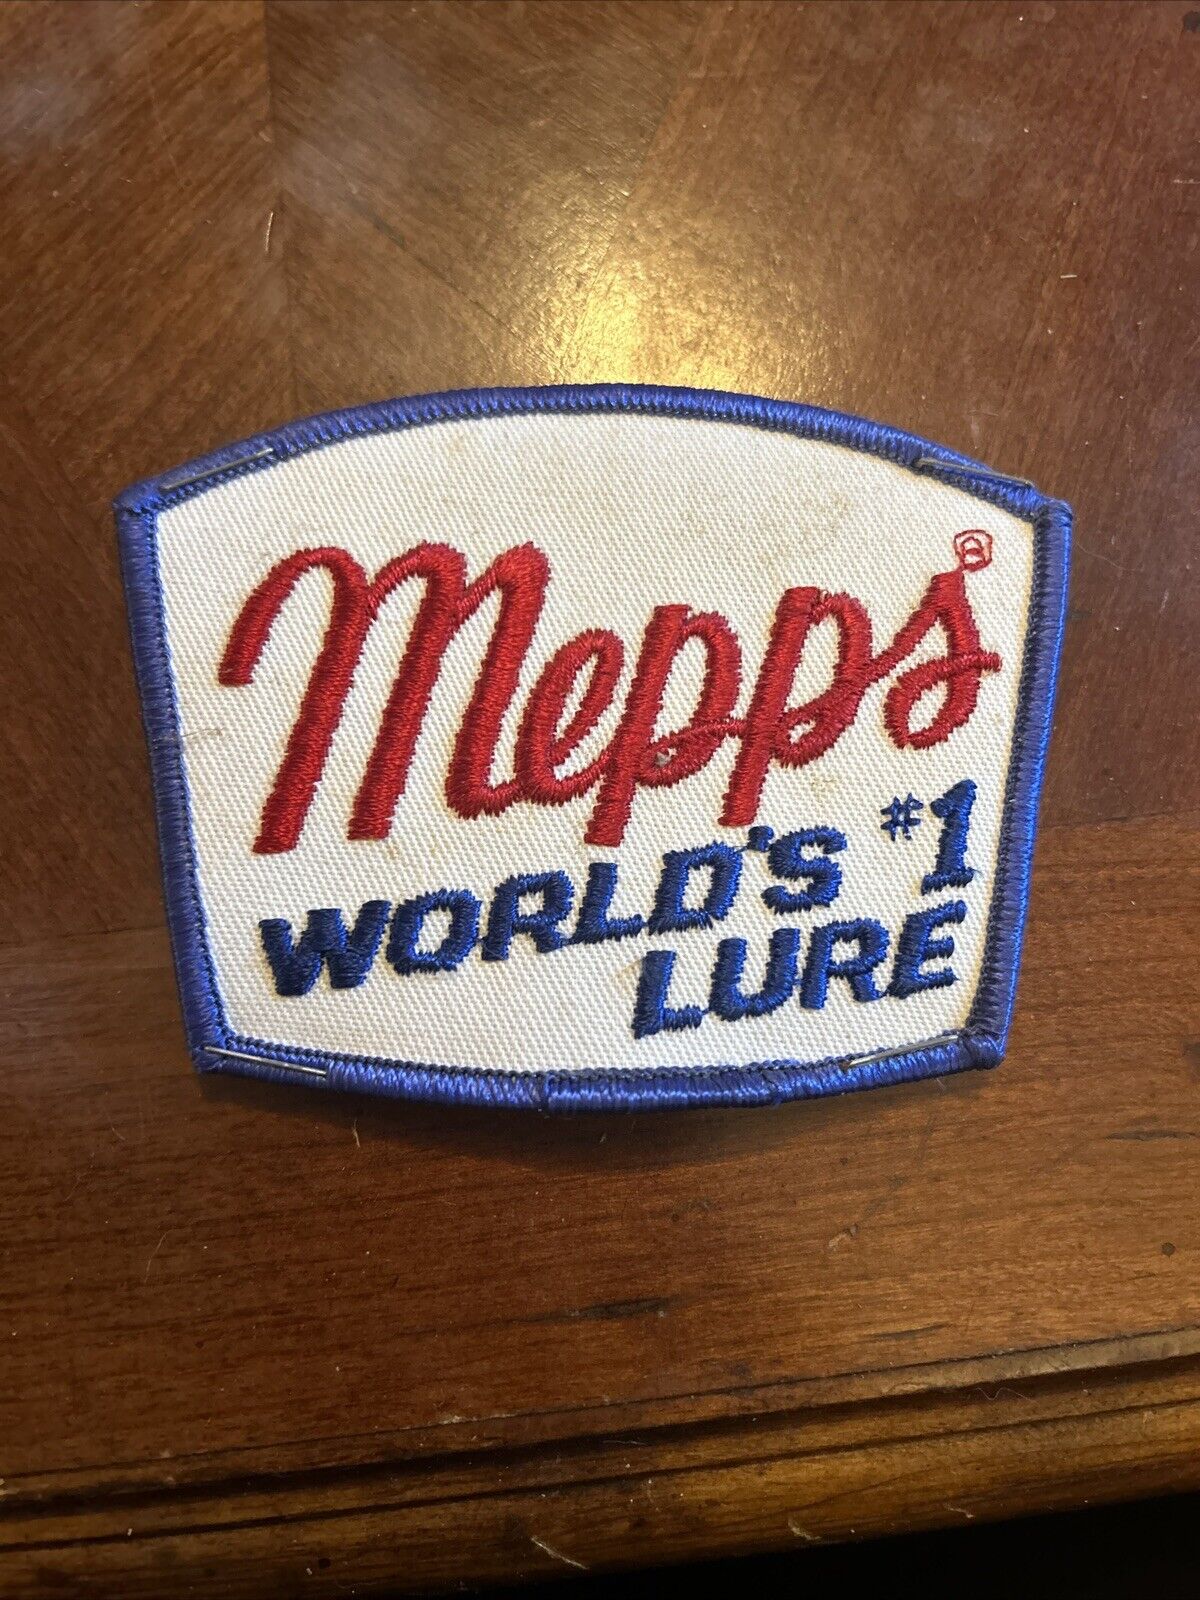 Vintage Mepps Fishing Lure Company Patch 3x4 inch